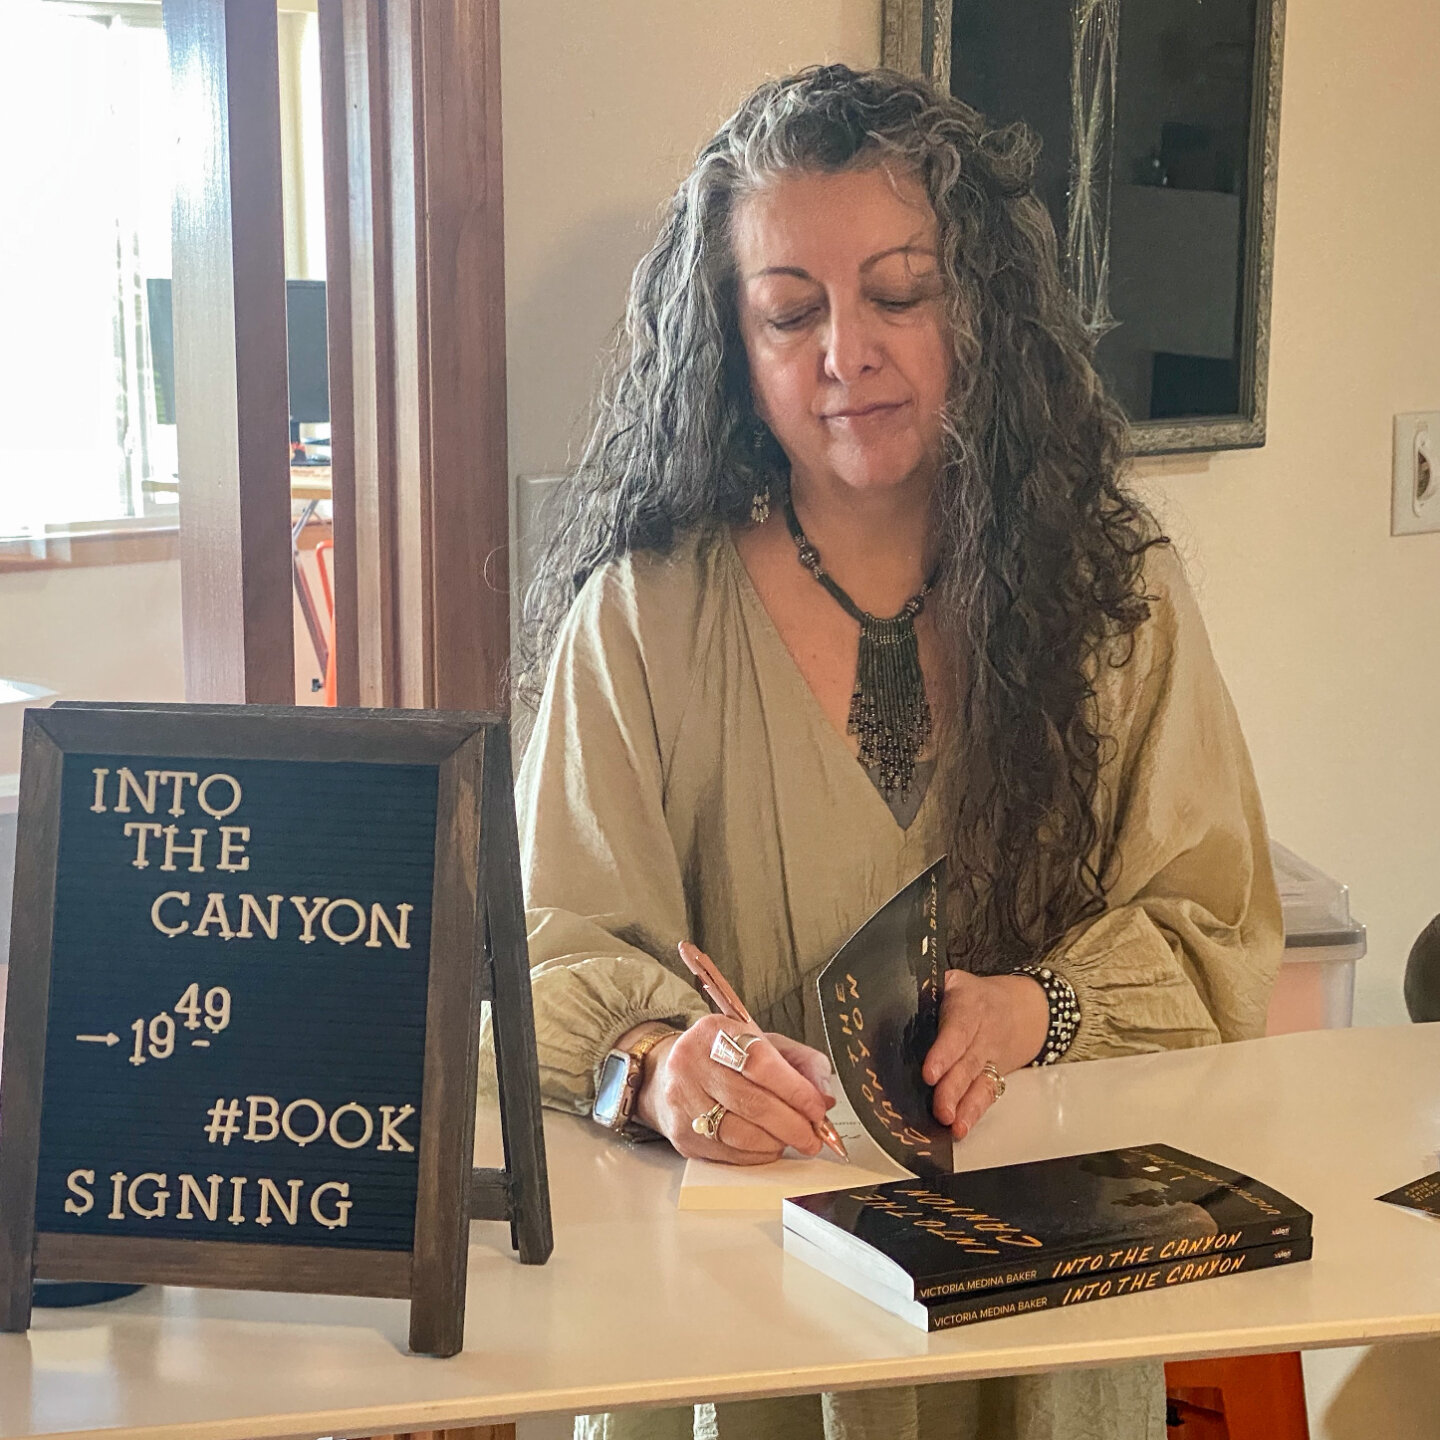 Thank you, everyone, who made it to the open house book signing! It was so fun seeing you all and celebrating Into the Canyon together. For those who couldn't make it, you can purchase a signed copy on my website!

https://www.en-spire.life/signed-co